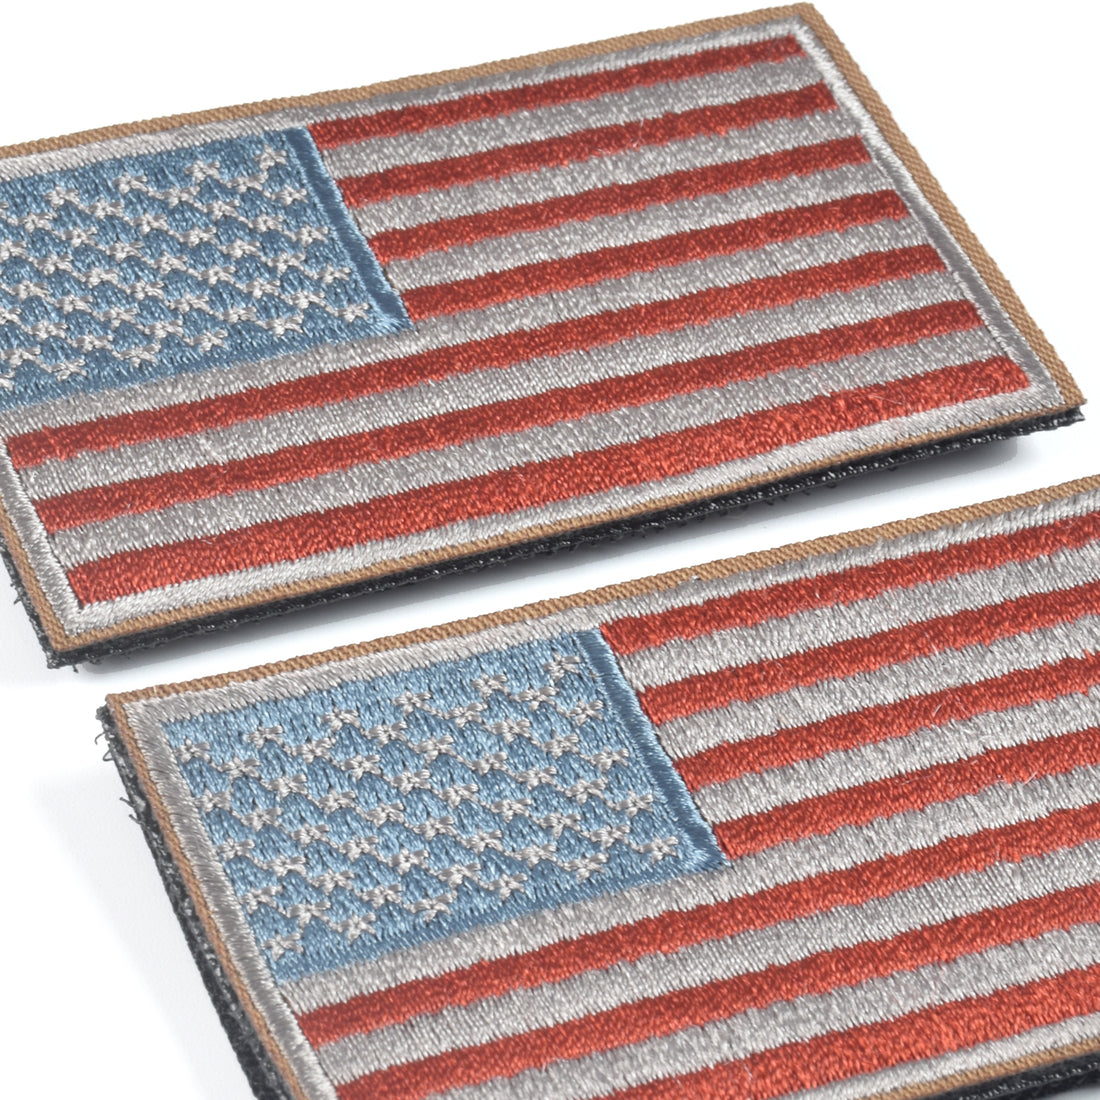 2 Pieces Tactical US American Flag Patch, Military USA United States of America Uniform Emblem Patches, Red & Blue